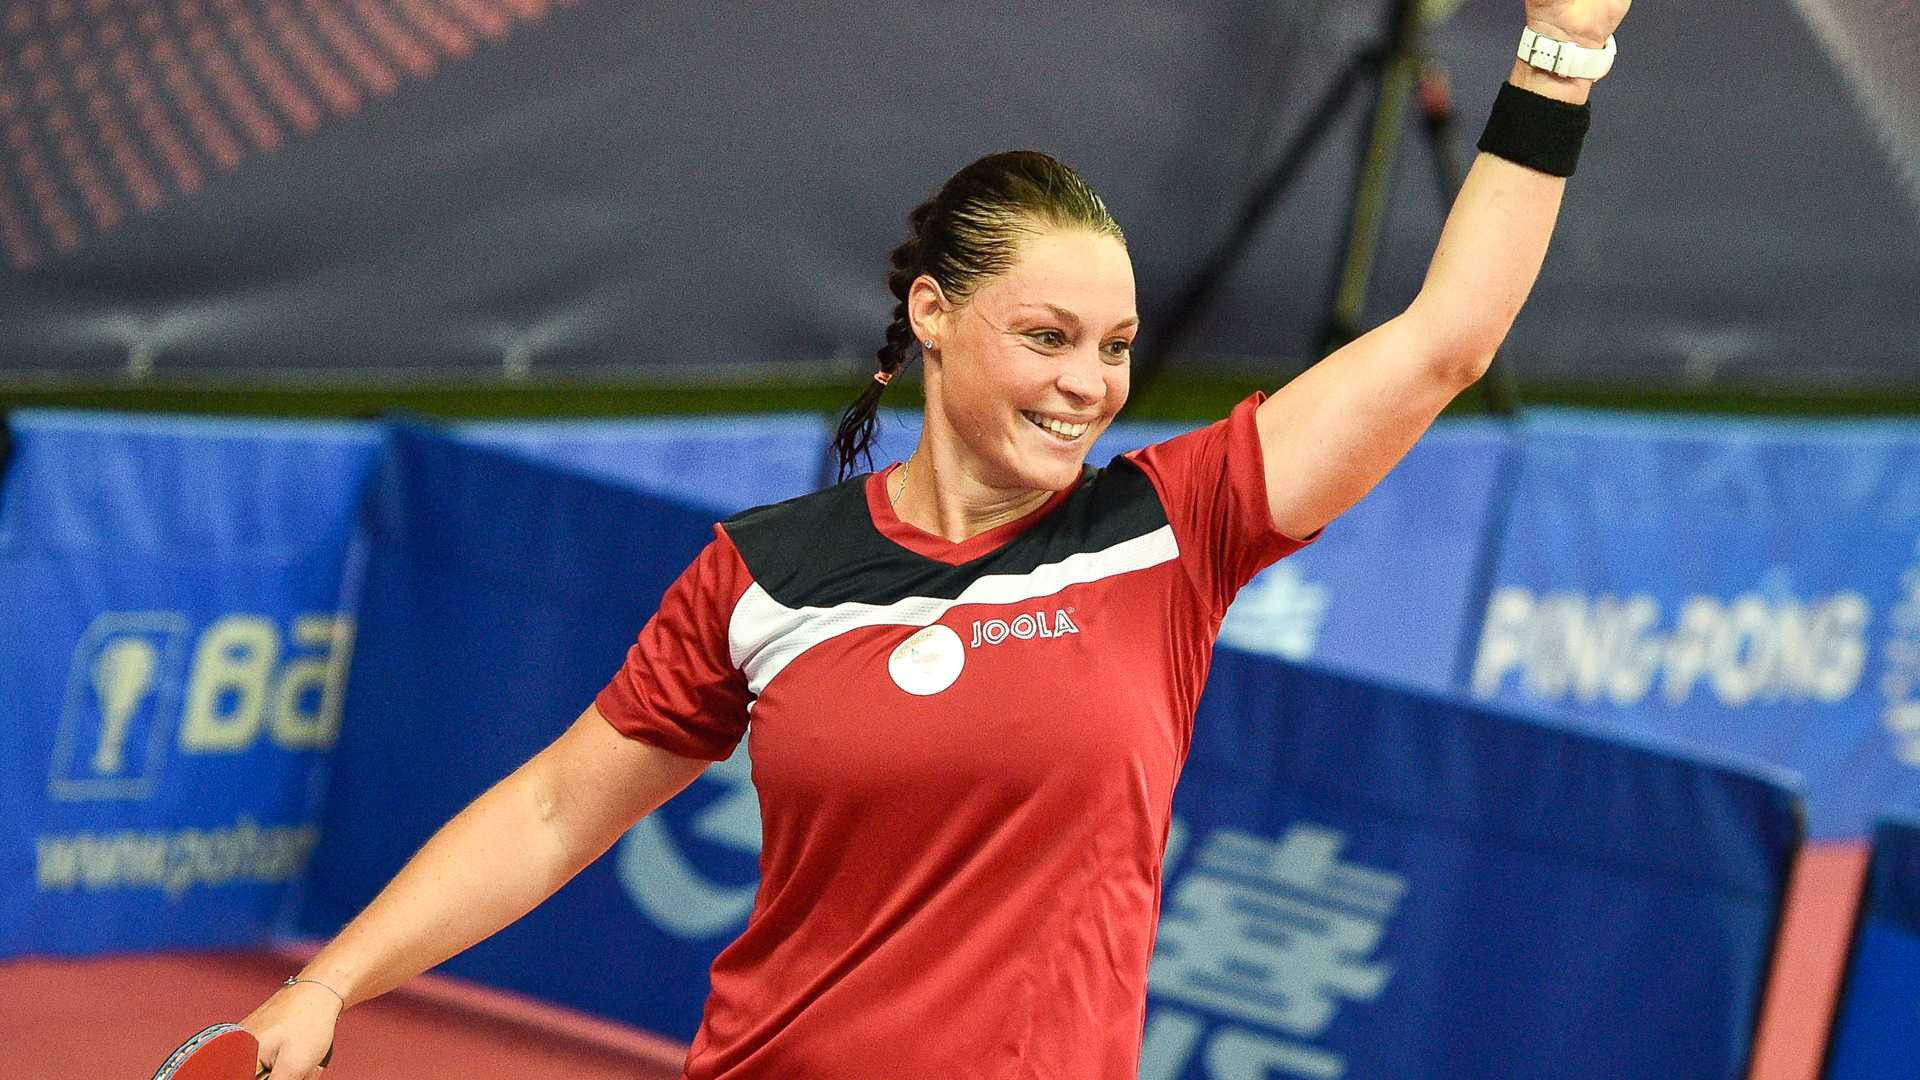 Home player Dana Cechova is through to the third preliminary round in the women's singles event ©ITTF/Lukas Kabon